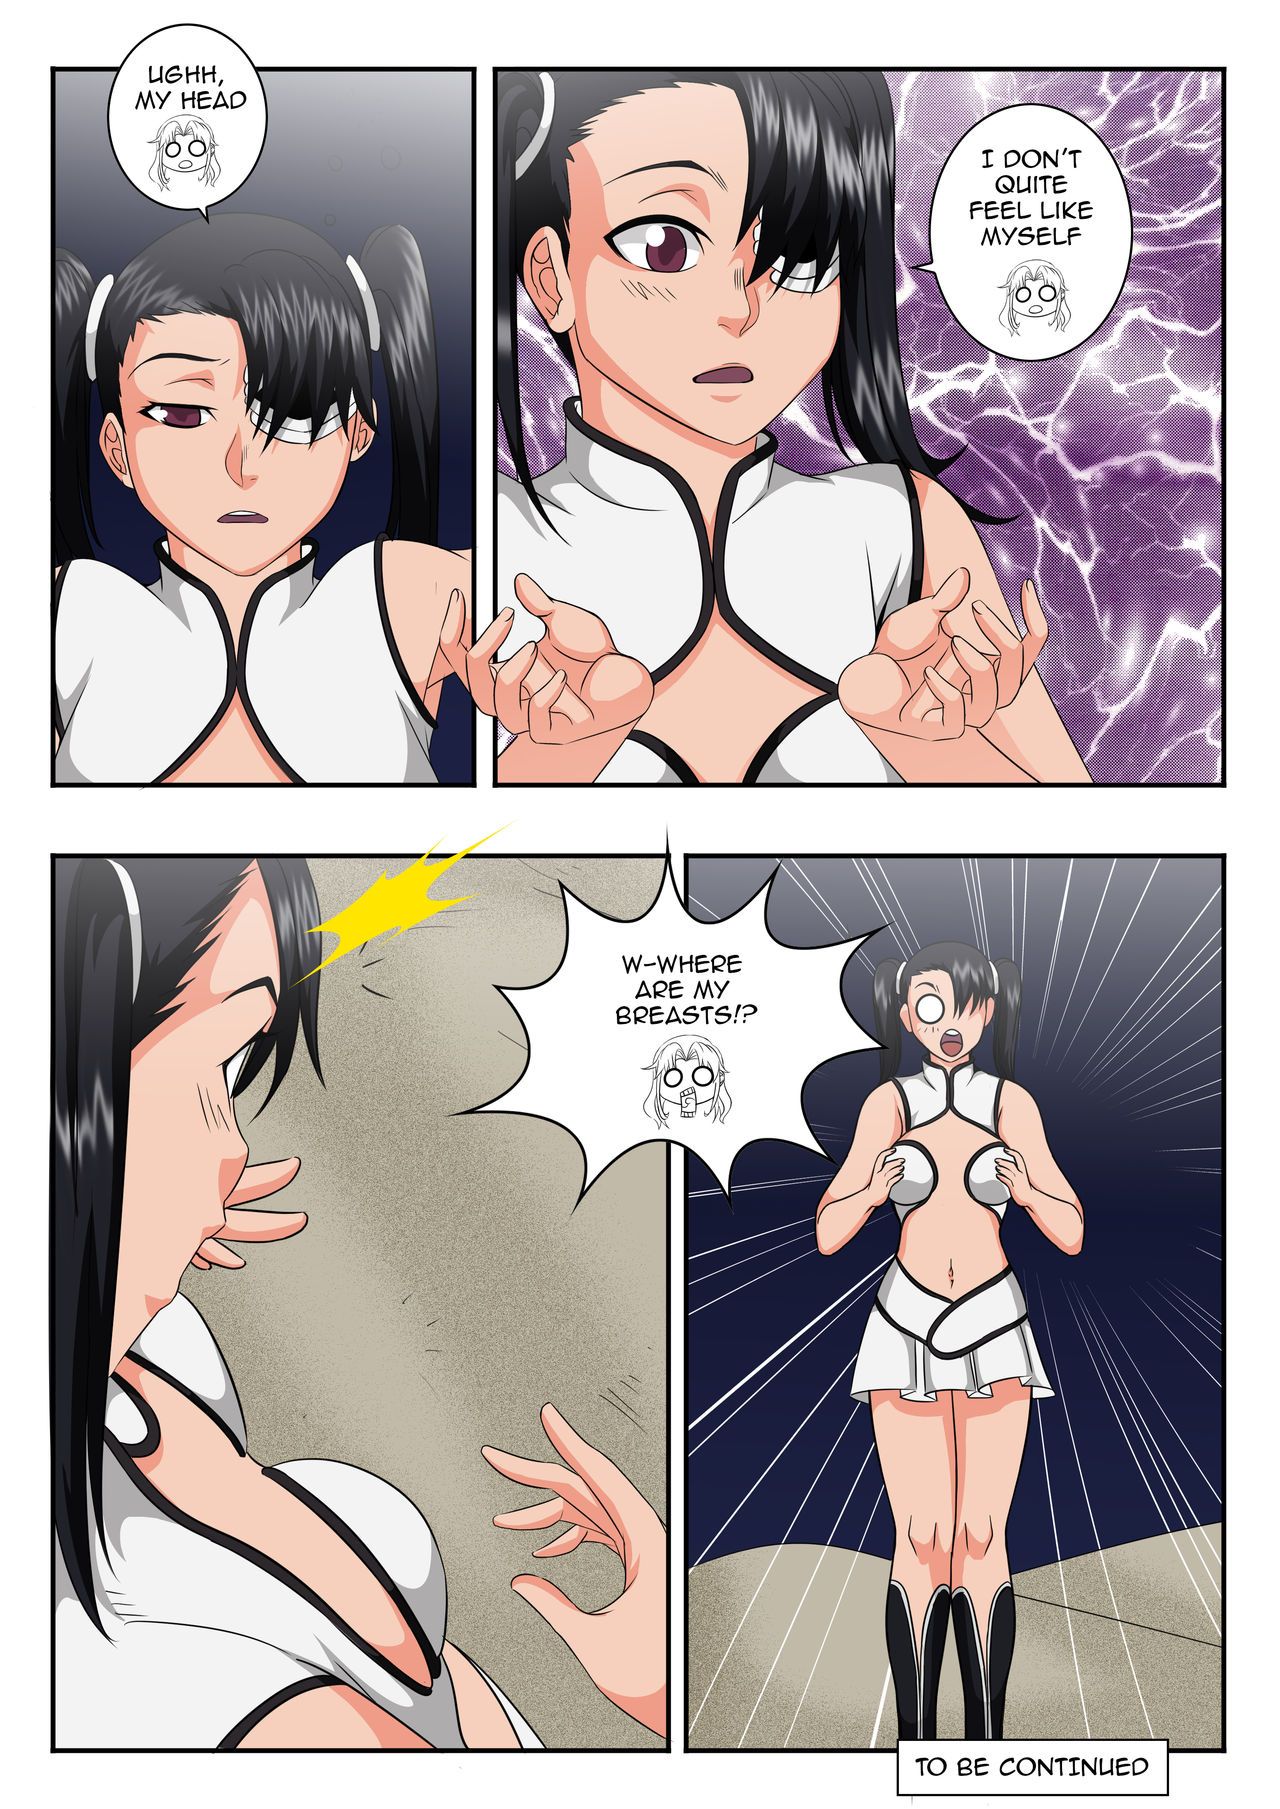 Bleach: A What If Story Part 4 Porn Comic english 29